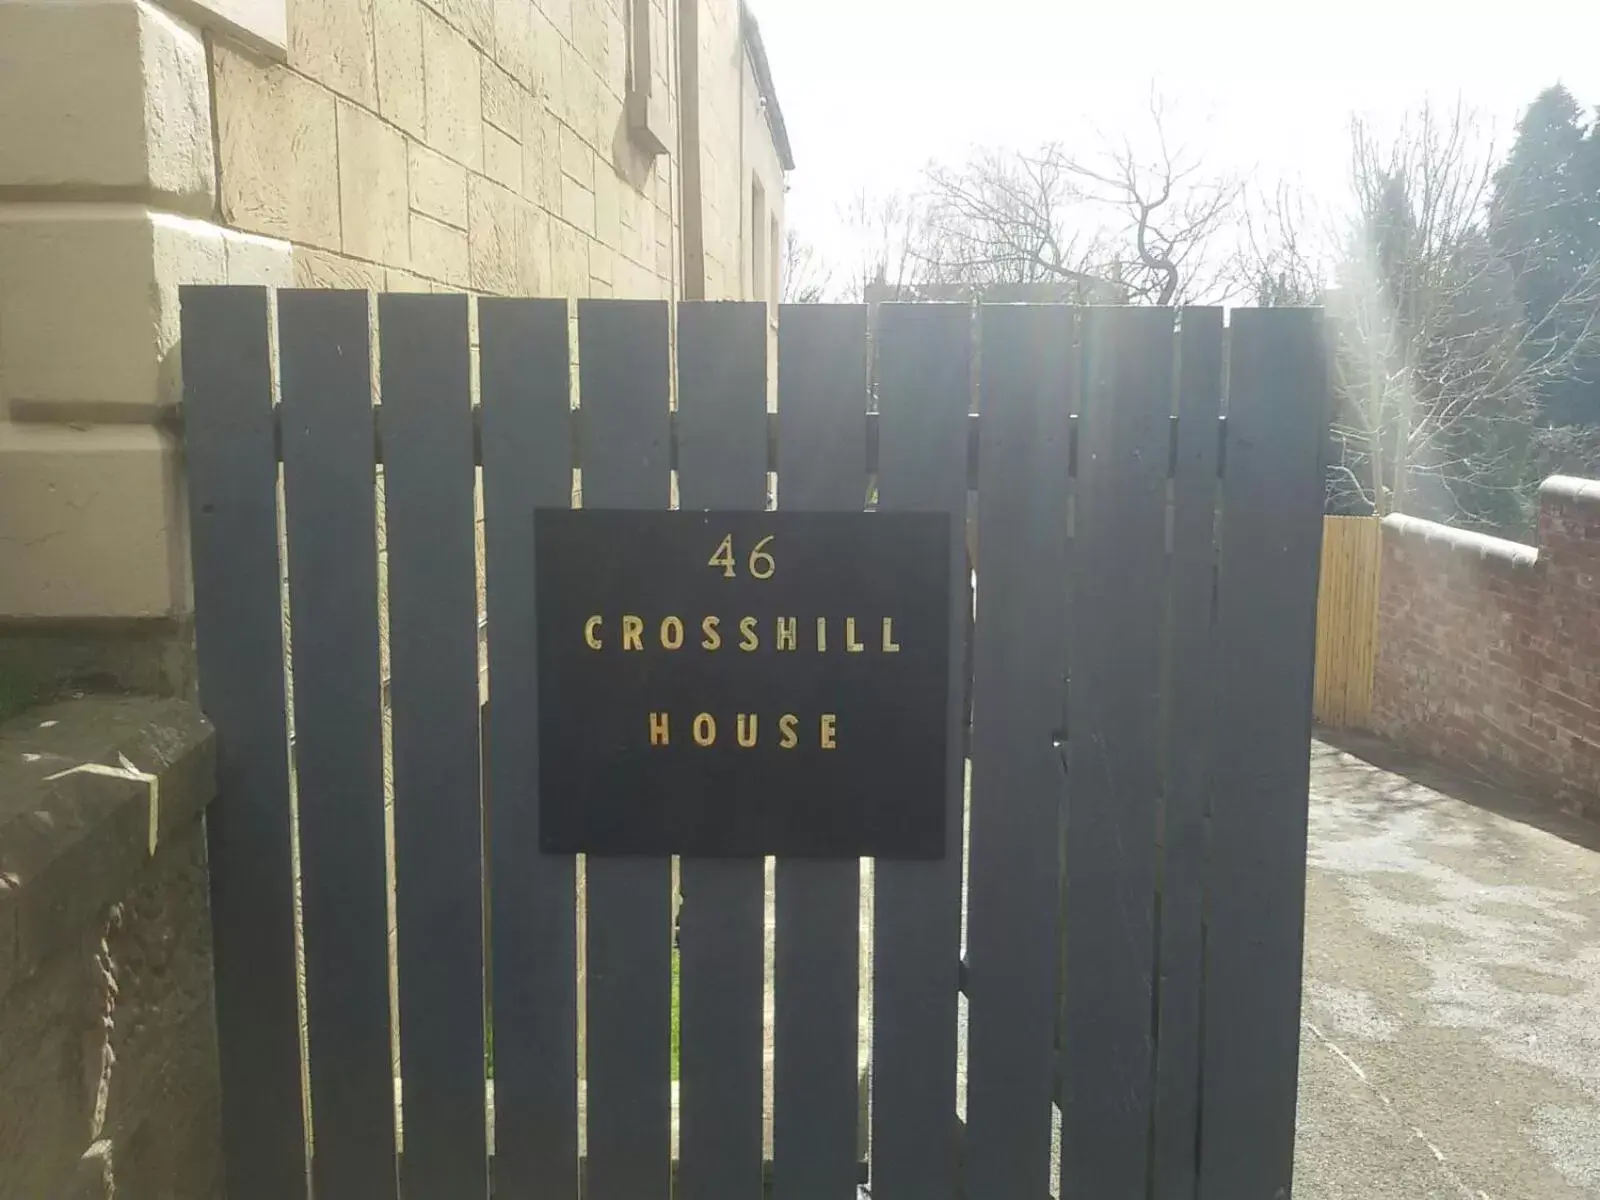 Property logo or sign in Crosshill House